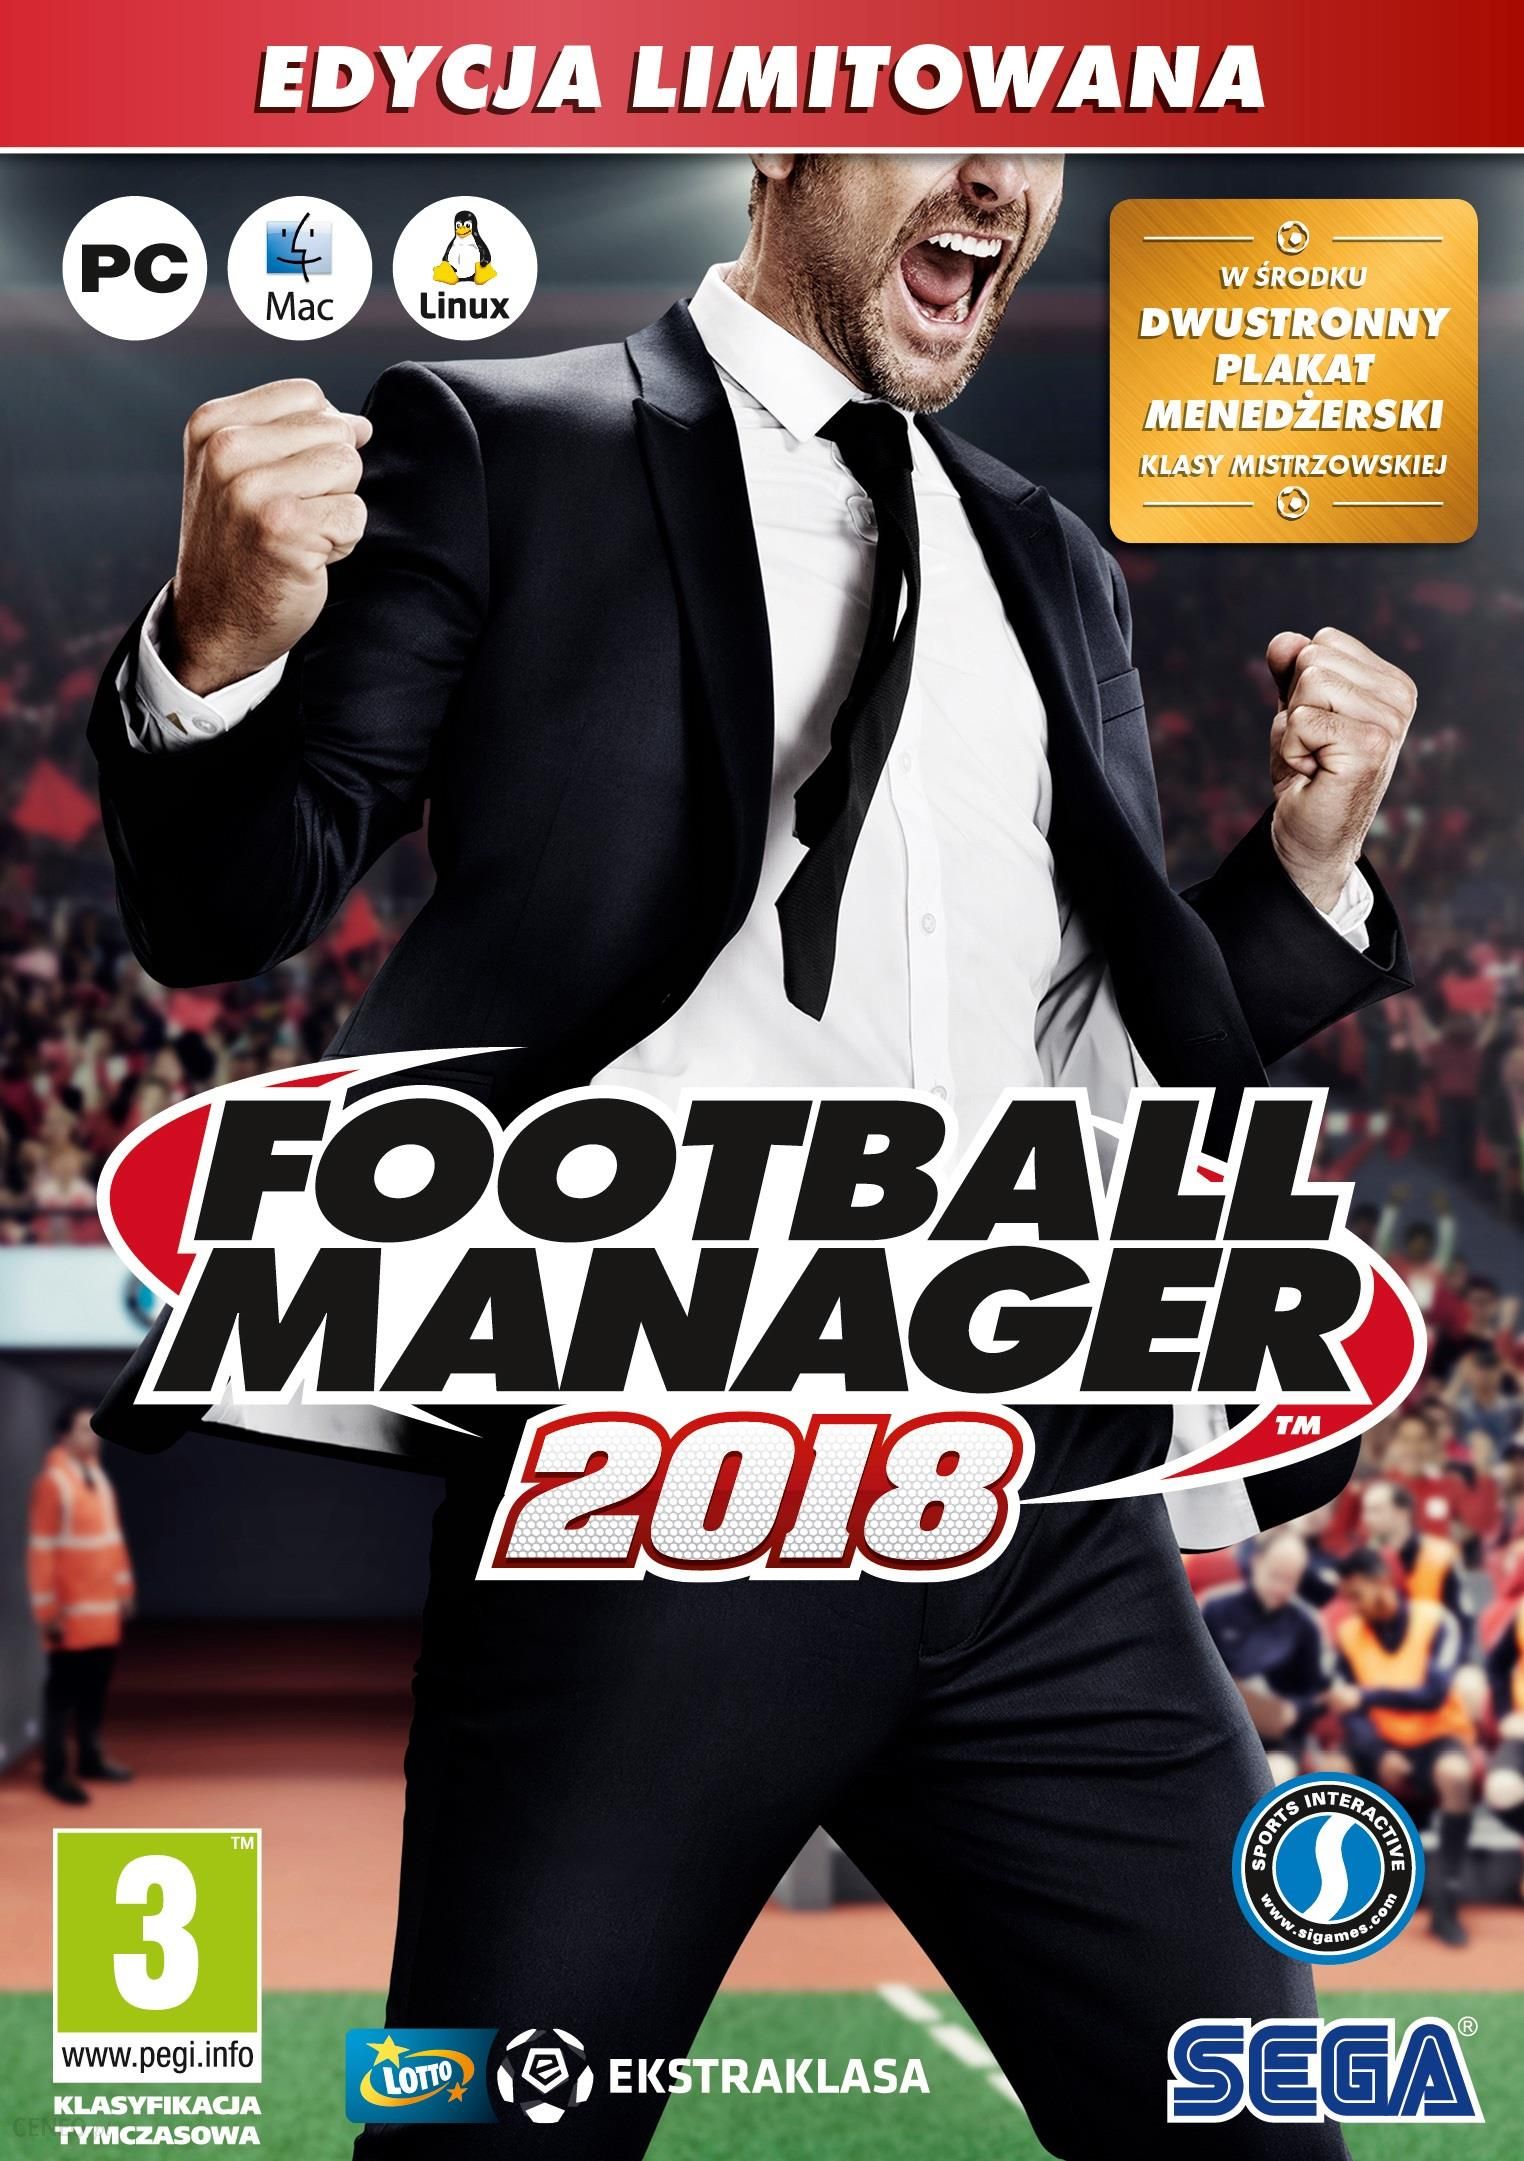 football manager 2018 mac download